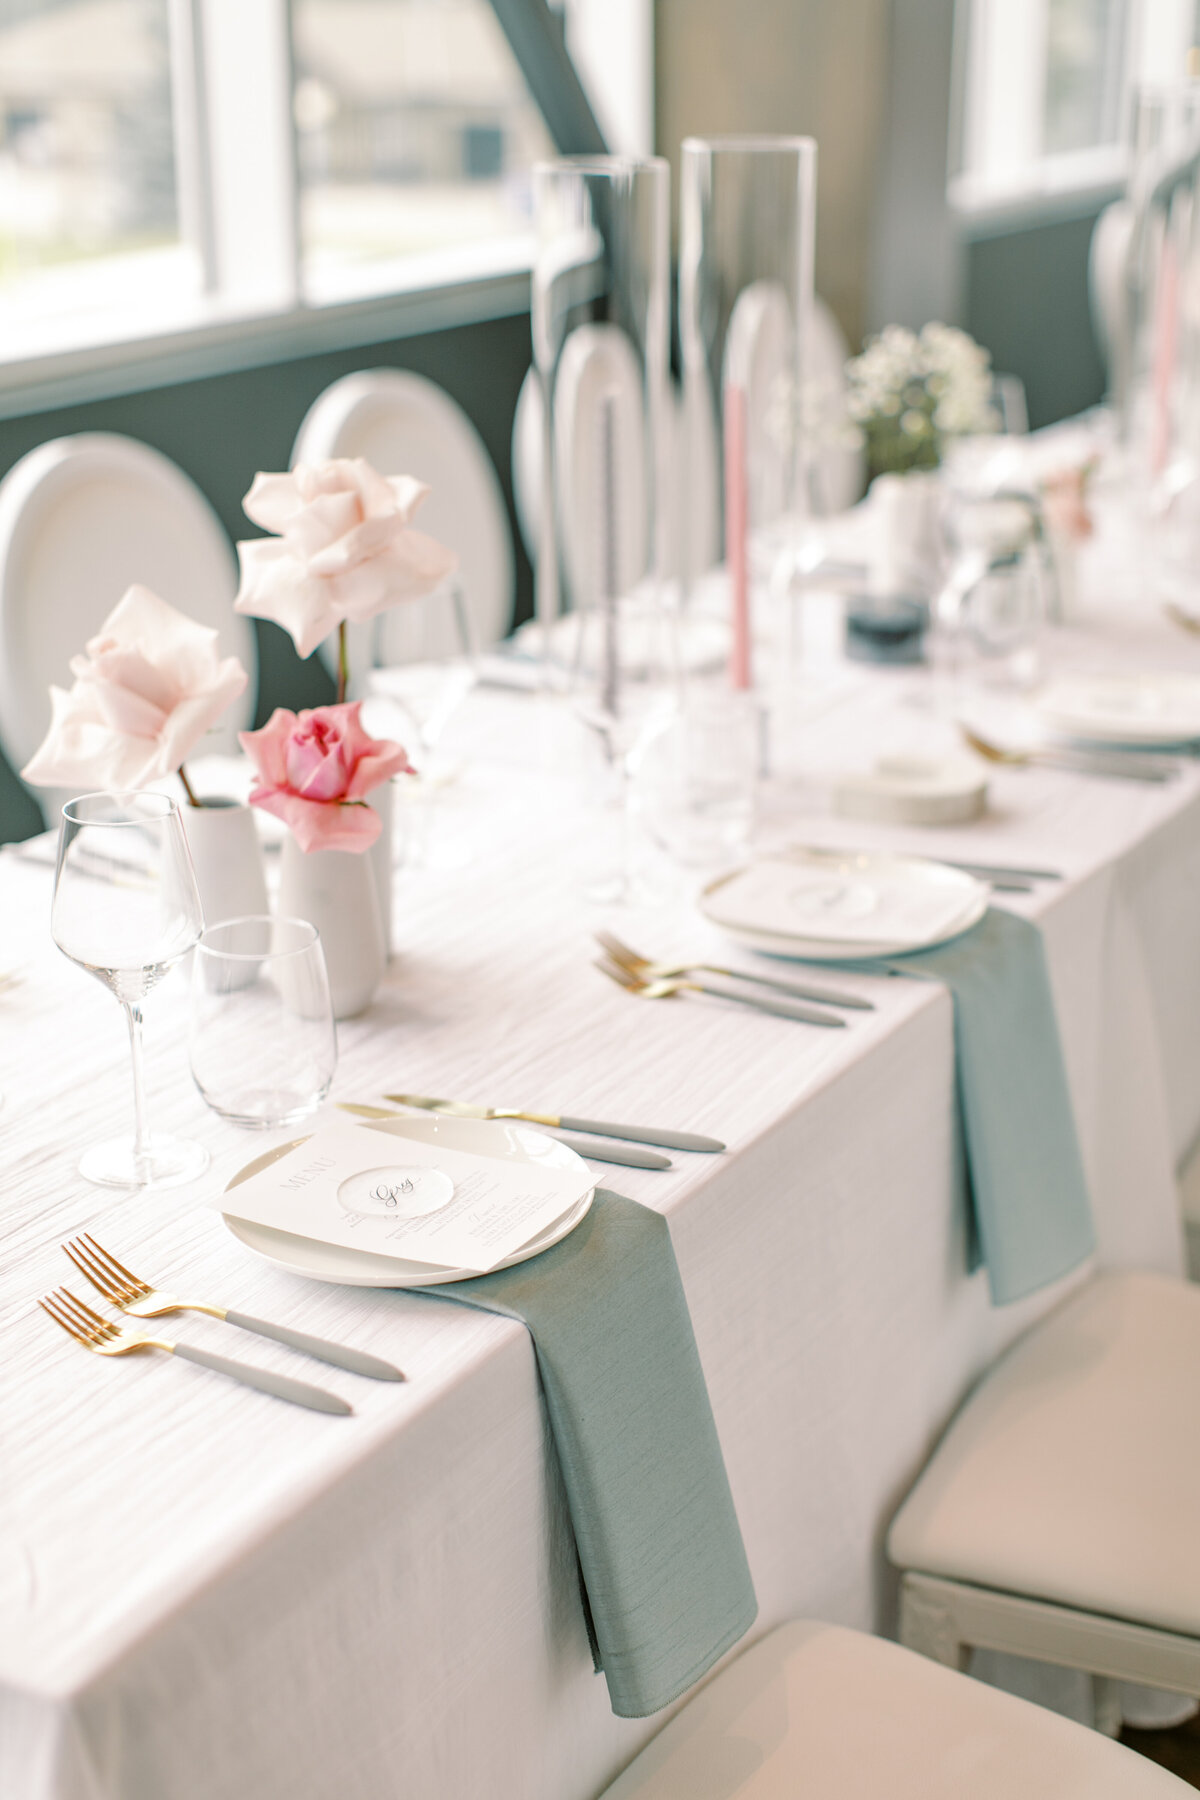 Modern Chic Wedding at The Sensory in Canmore Alberta, designed and planned by Rebekah Brontë, with a colour palette of fresh white, smoke grey, blush pink, and subtle seafoam - modern wedding reception table inspiration